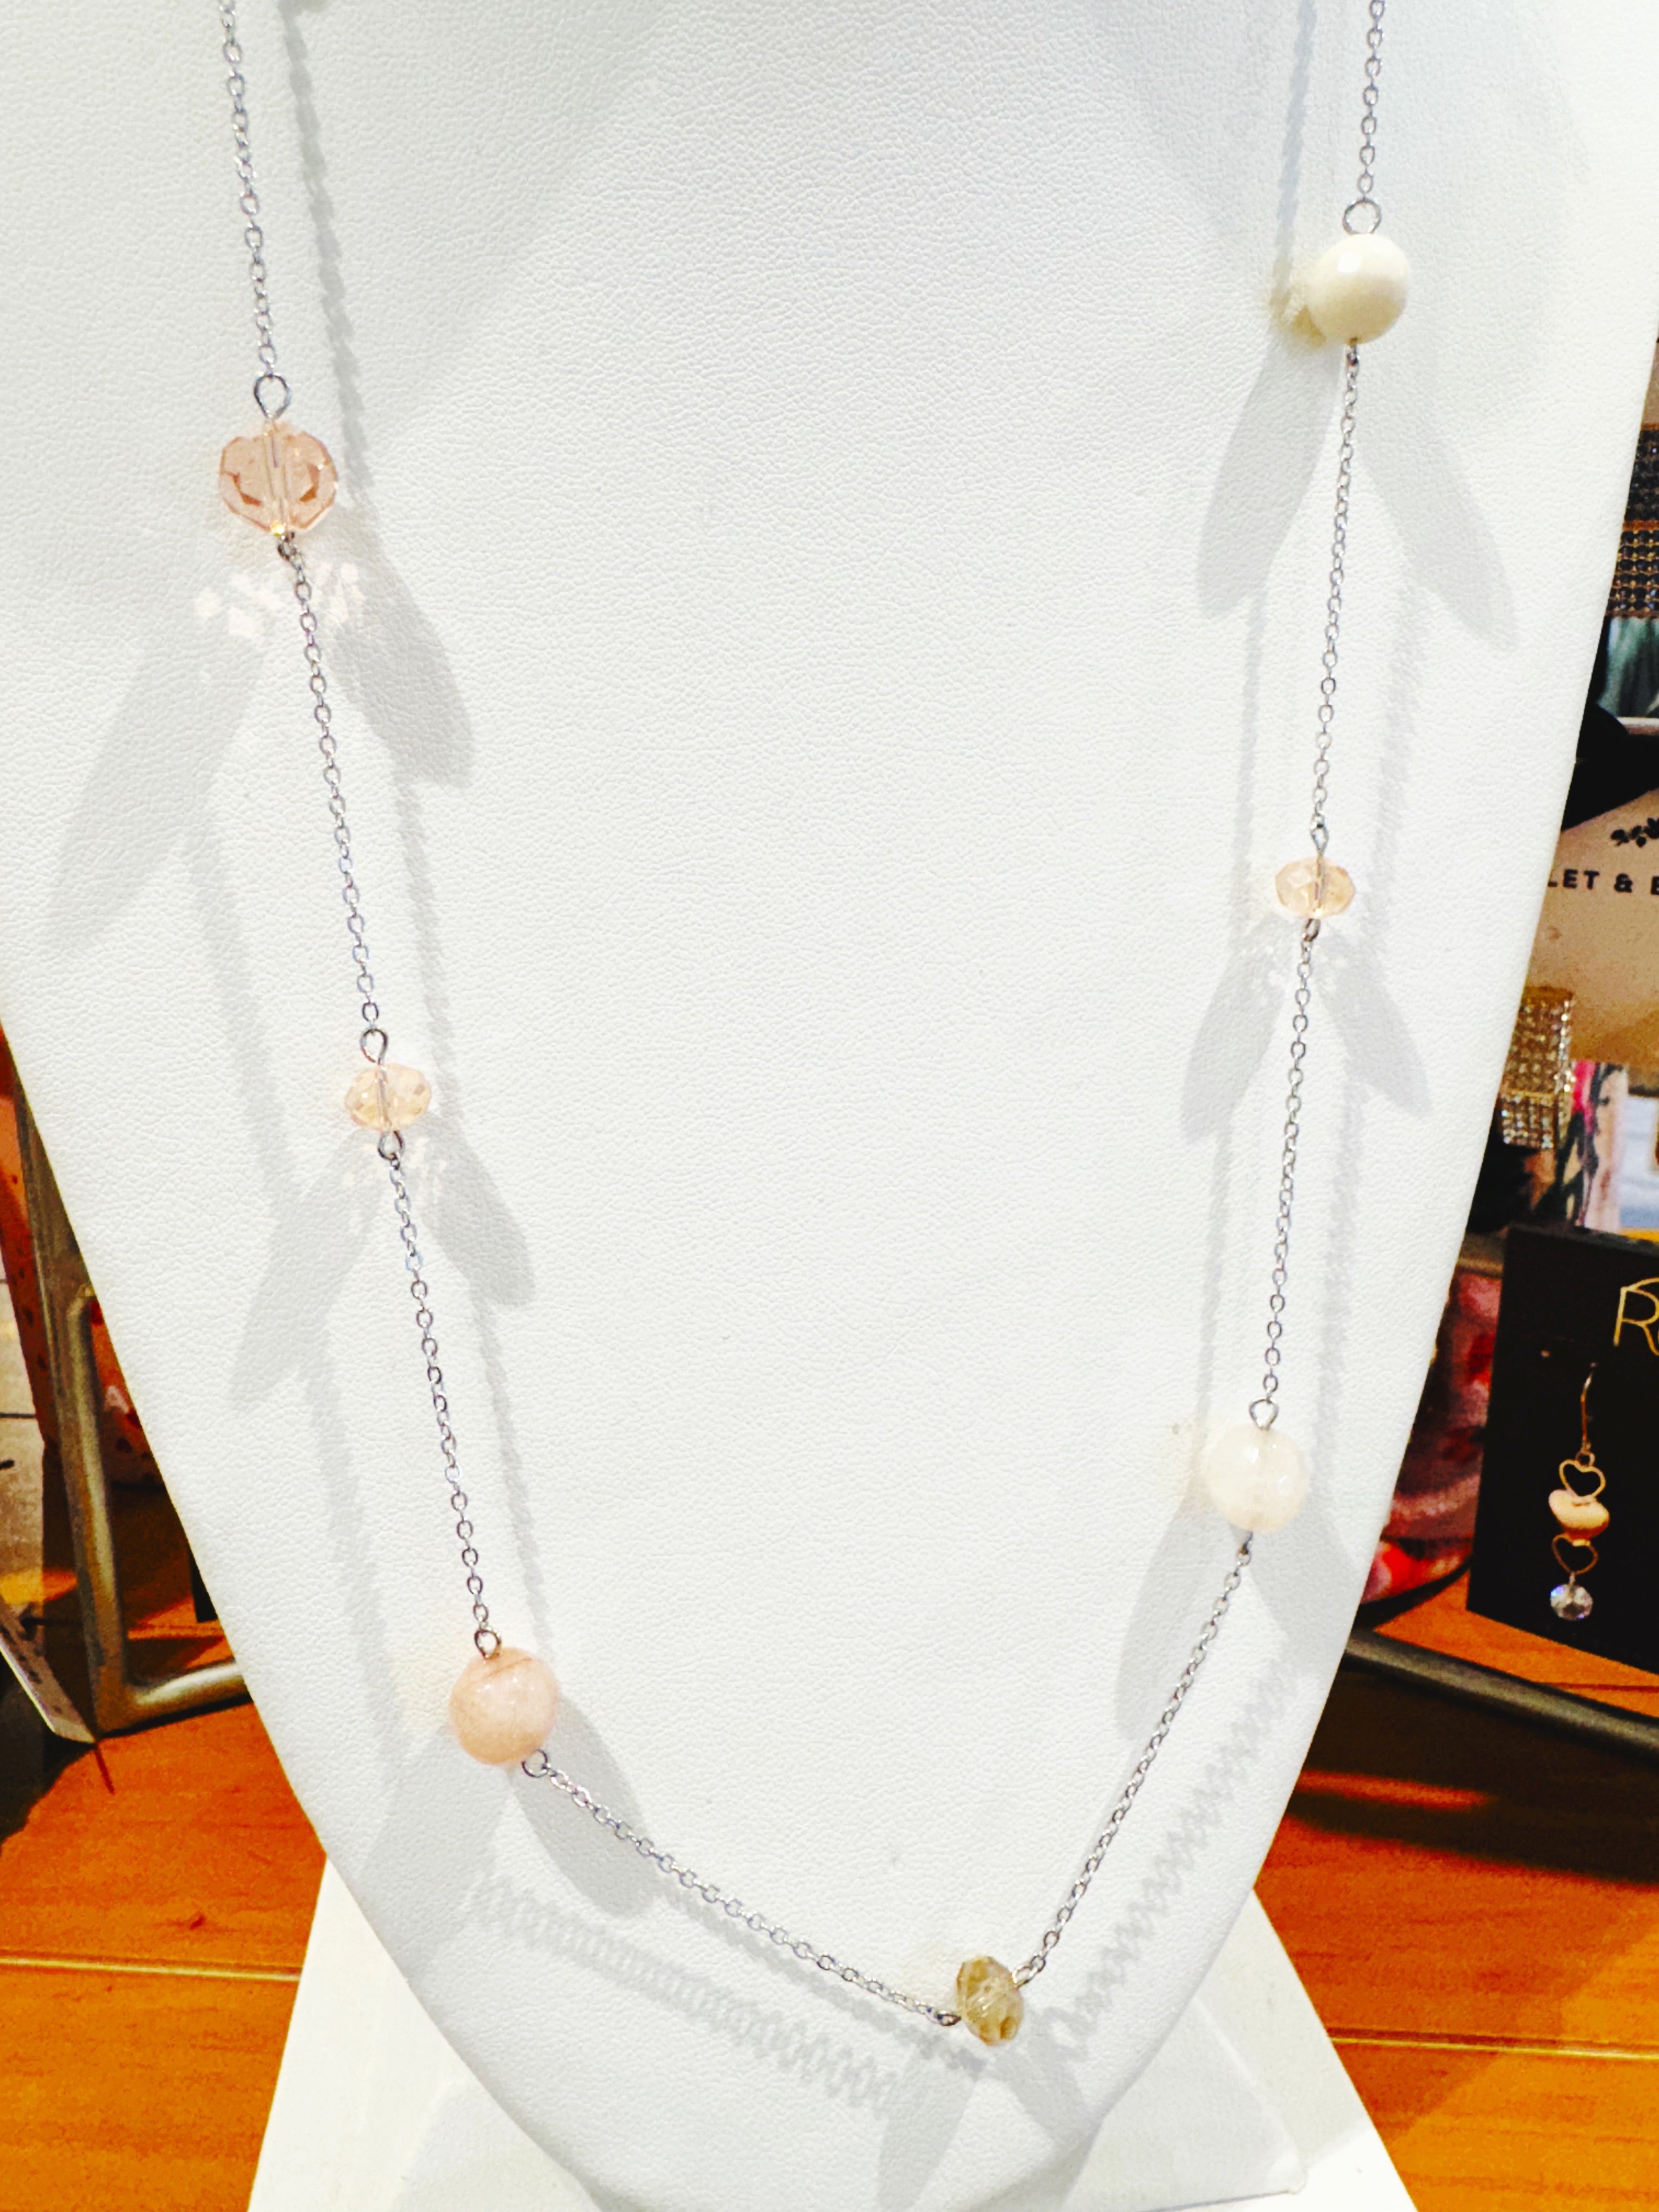 Silver Chain w/Pink Tone Beads Necklace